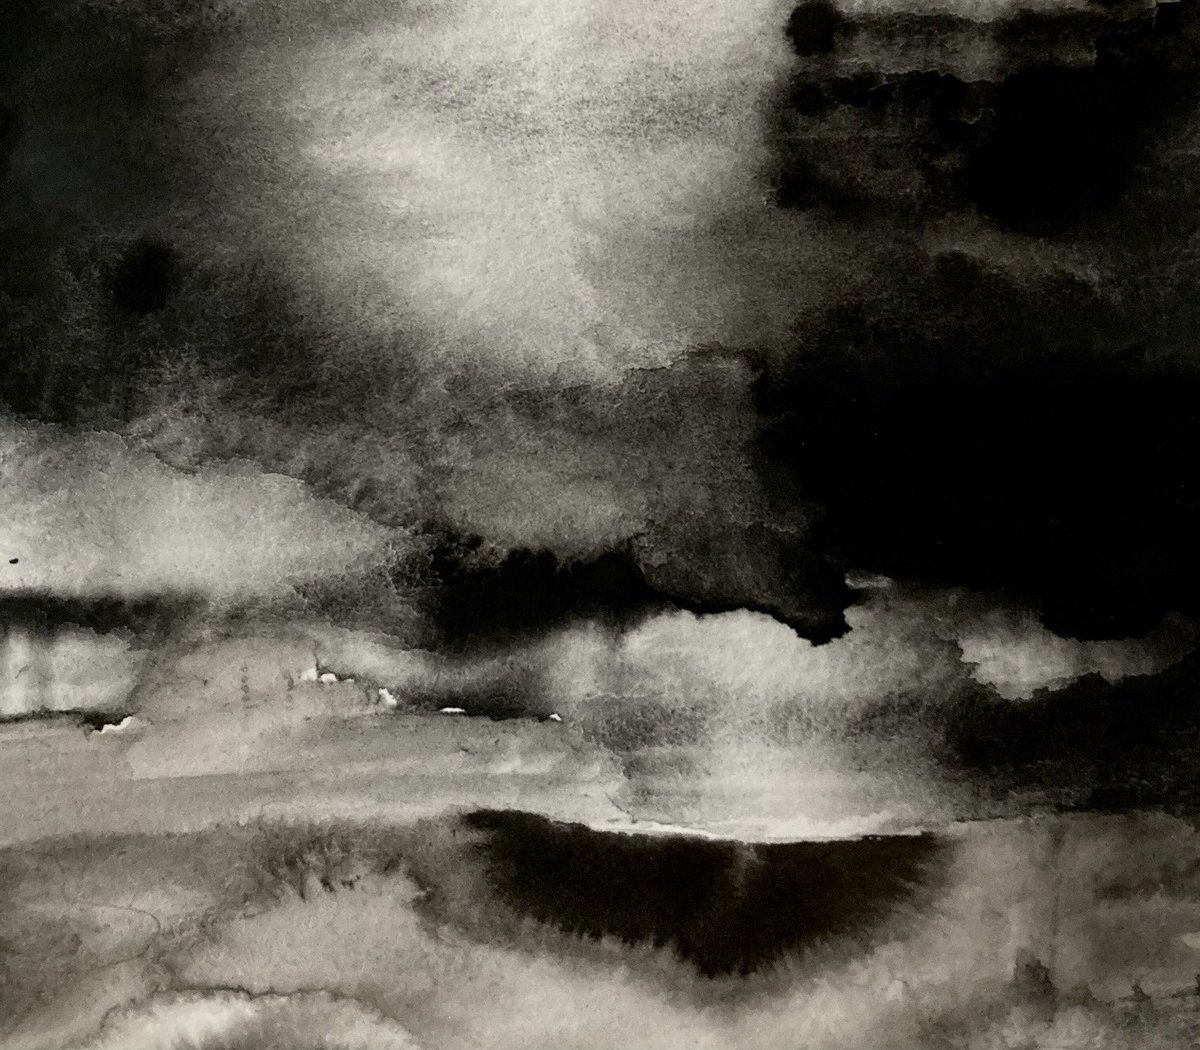 Sunrising, detail. #drawing #charcoal #sunrise #memory #dream #liminal #listening #abstract #landscape